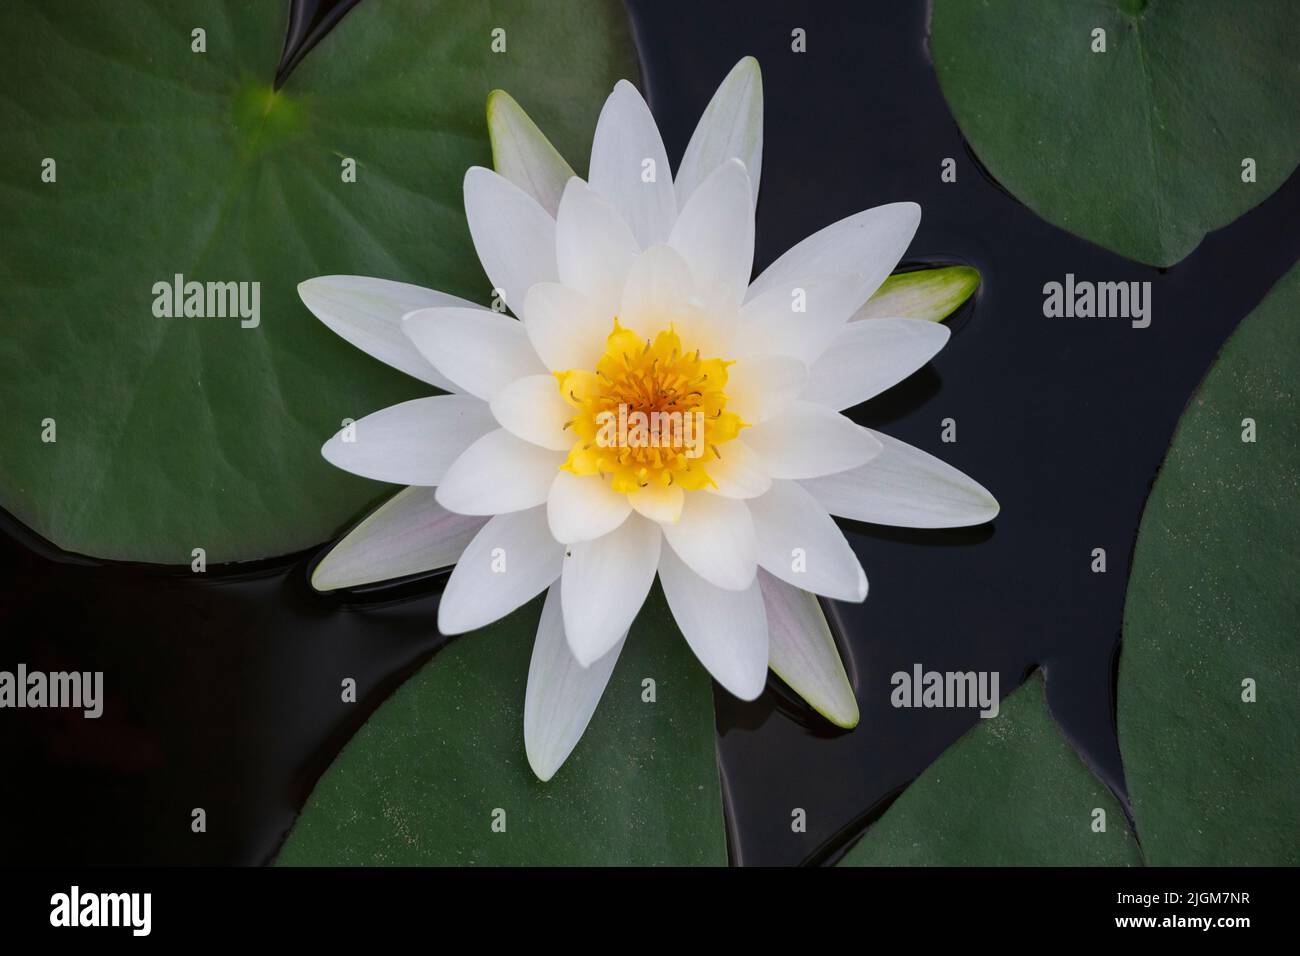 White and yellow lotus blossom at the Queen Sirikit Botanical Garden not far from CHIANG MAI, THAILAND Stock Photo